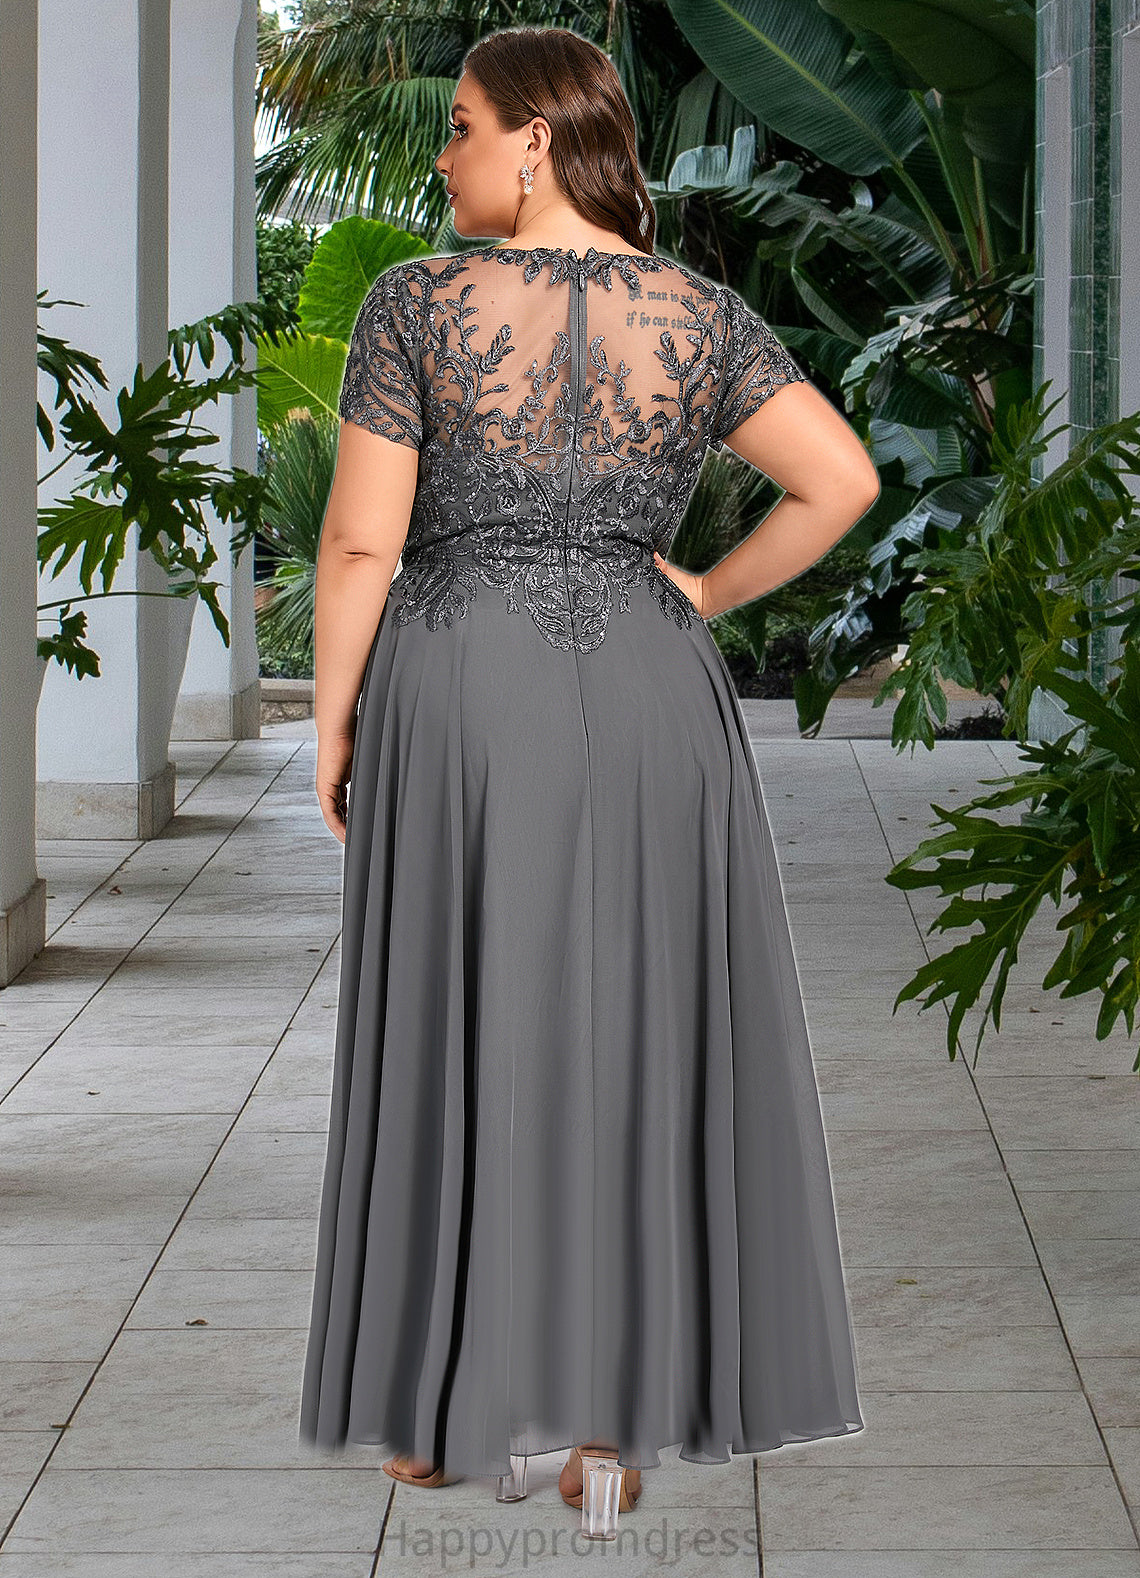 Aspen A-line V-Neck Illusion Ankle-Length Chiffon Lace Mother of the Bride Dress With Sequins XXSP0021830